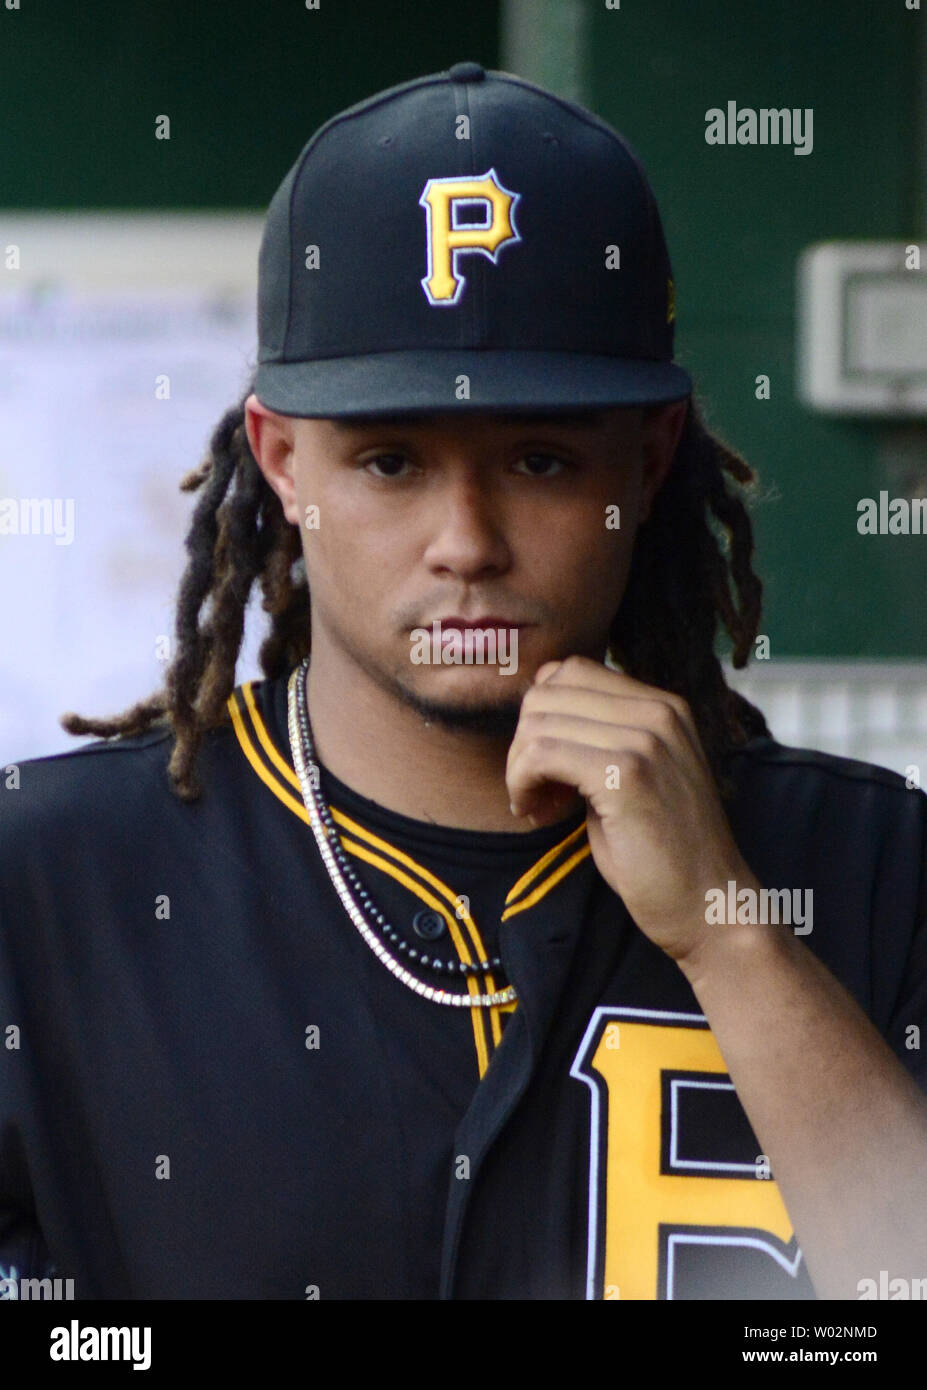 The Pittsburgh Pirates are now seeing the real Chris Archer - Bucs Dugout